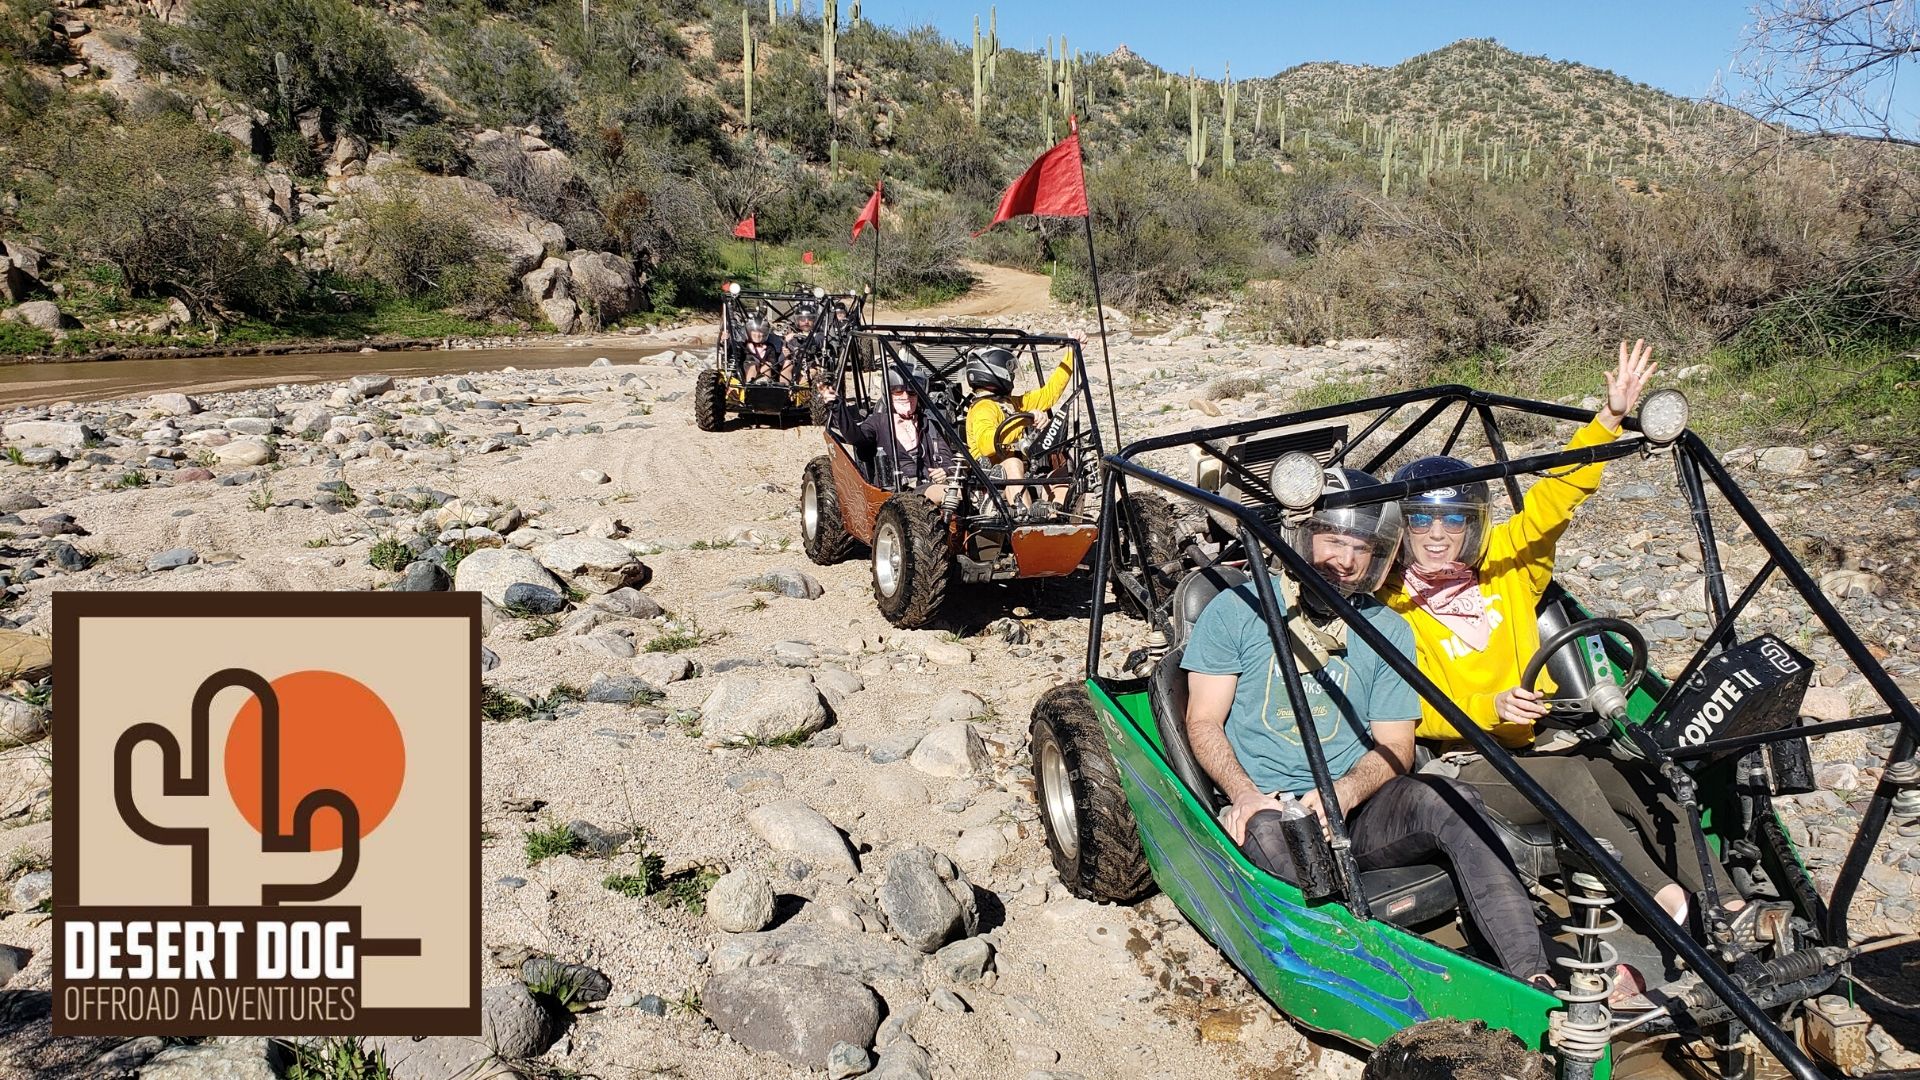 Friends enjoy going off-road in guided tours around Salt River.